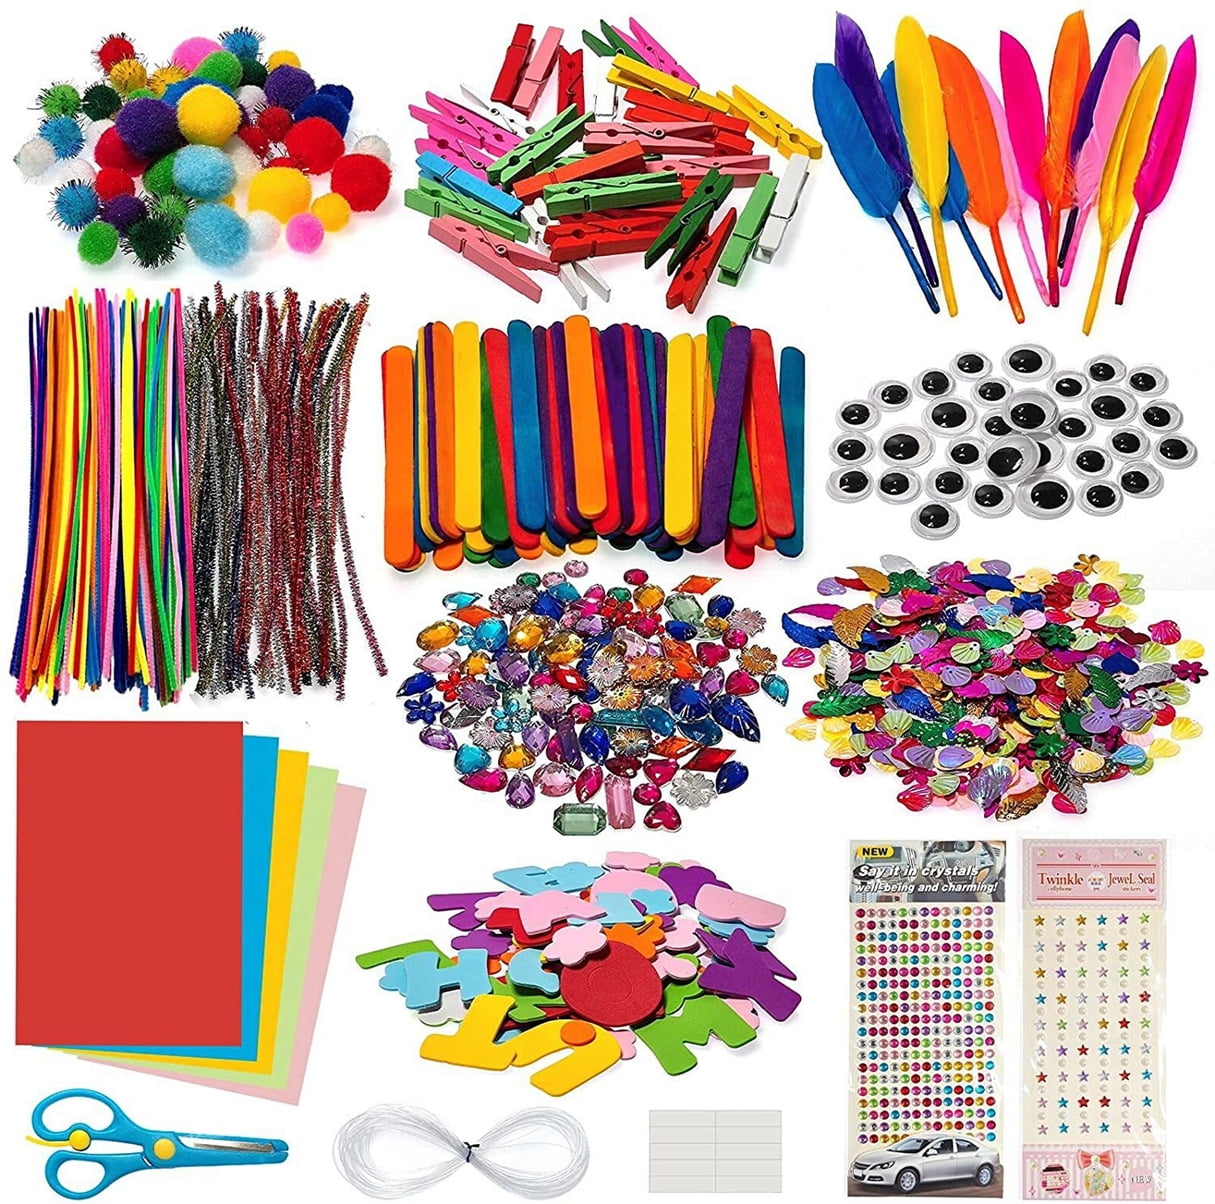 YITOHOP Arts Craft Supplies for Kids, 1000+ Pcs Toddler DIY Craft Art Supply Set Include Pipe Cleaners, Pom Poms, Storage Box, 2023 Best Xmas Gift for